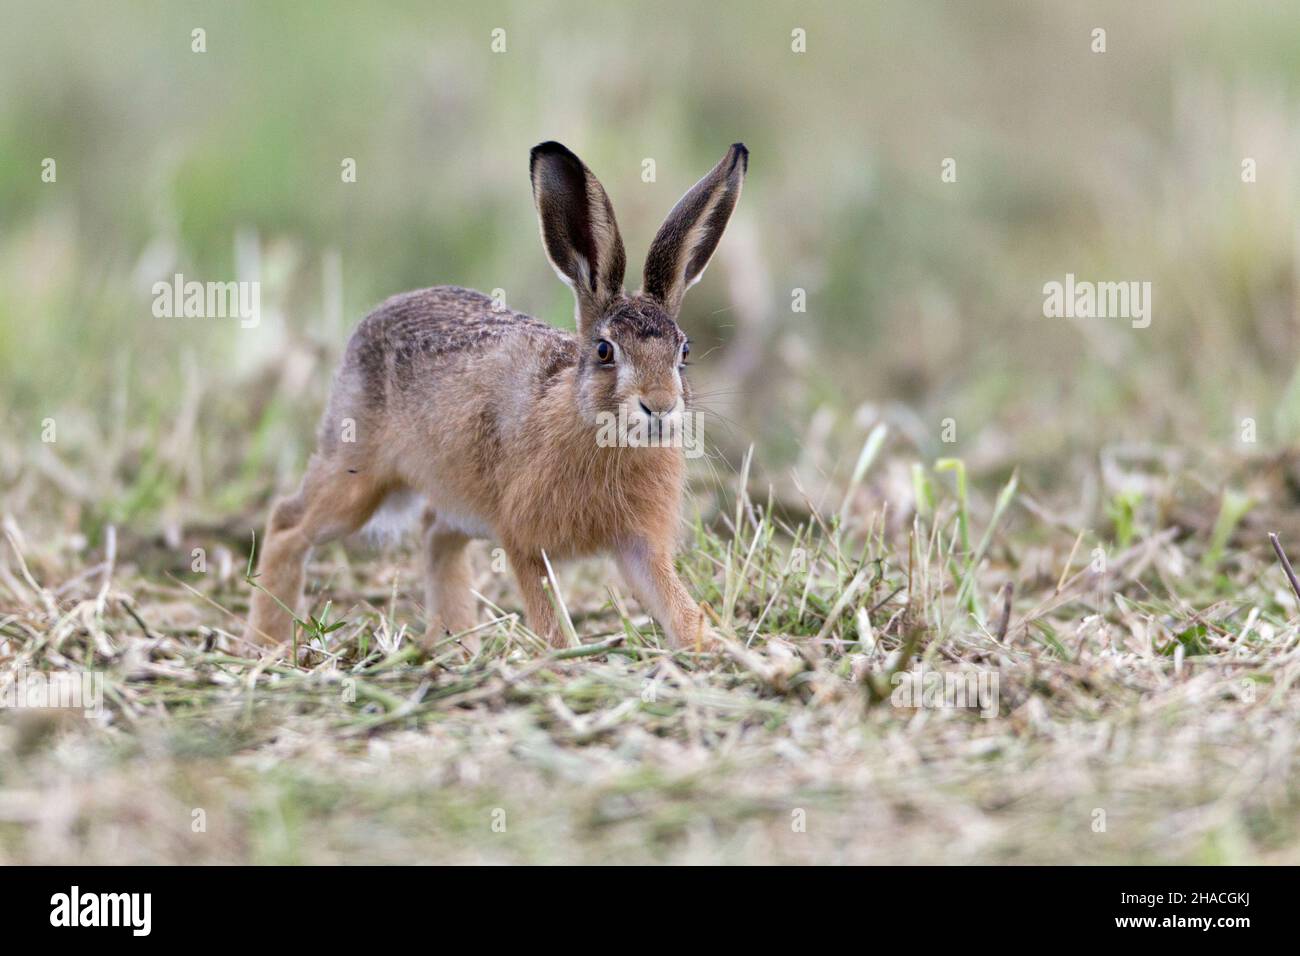 European hare (Lepus europaeus), young animal or leveret on field, stretching itself, Lower Saxony, Germany Stock Photo